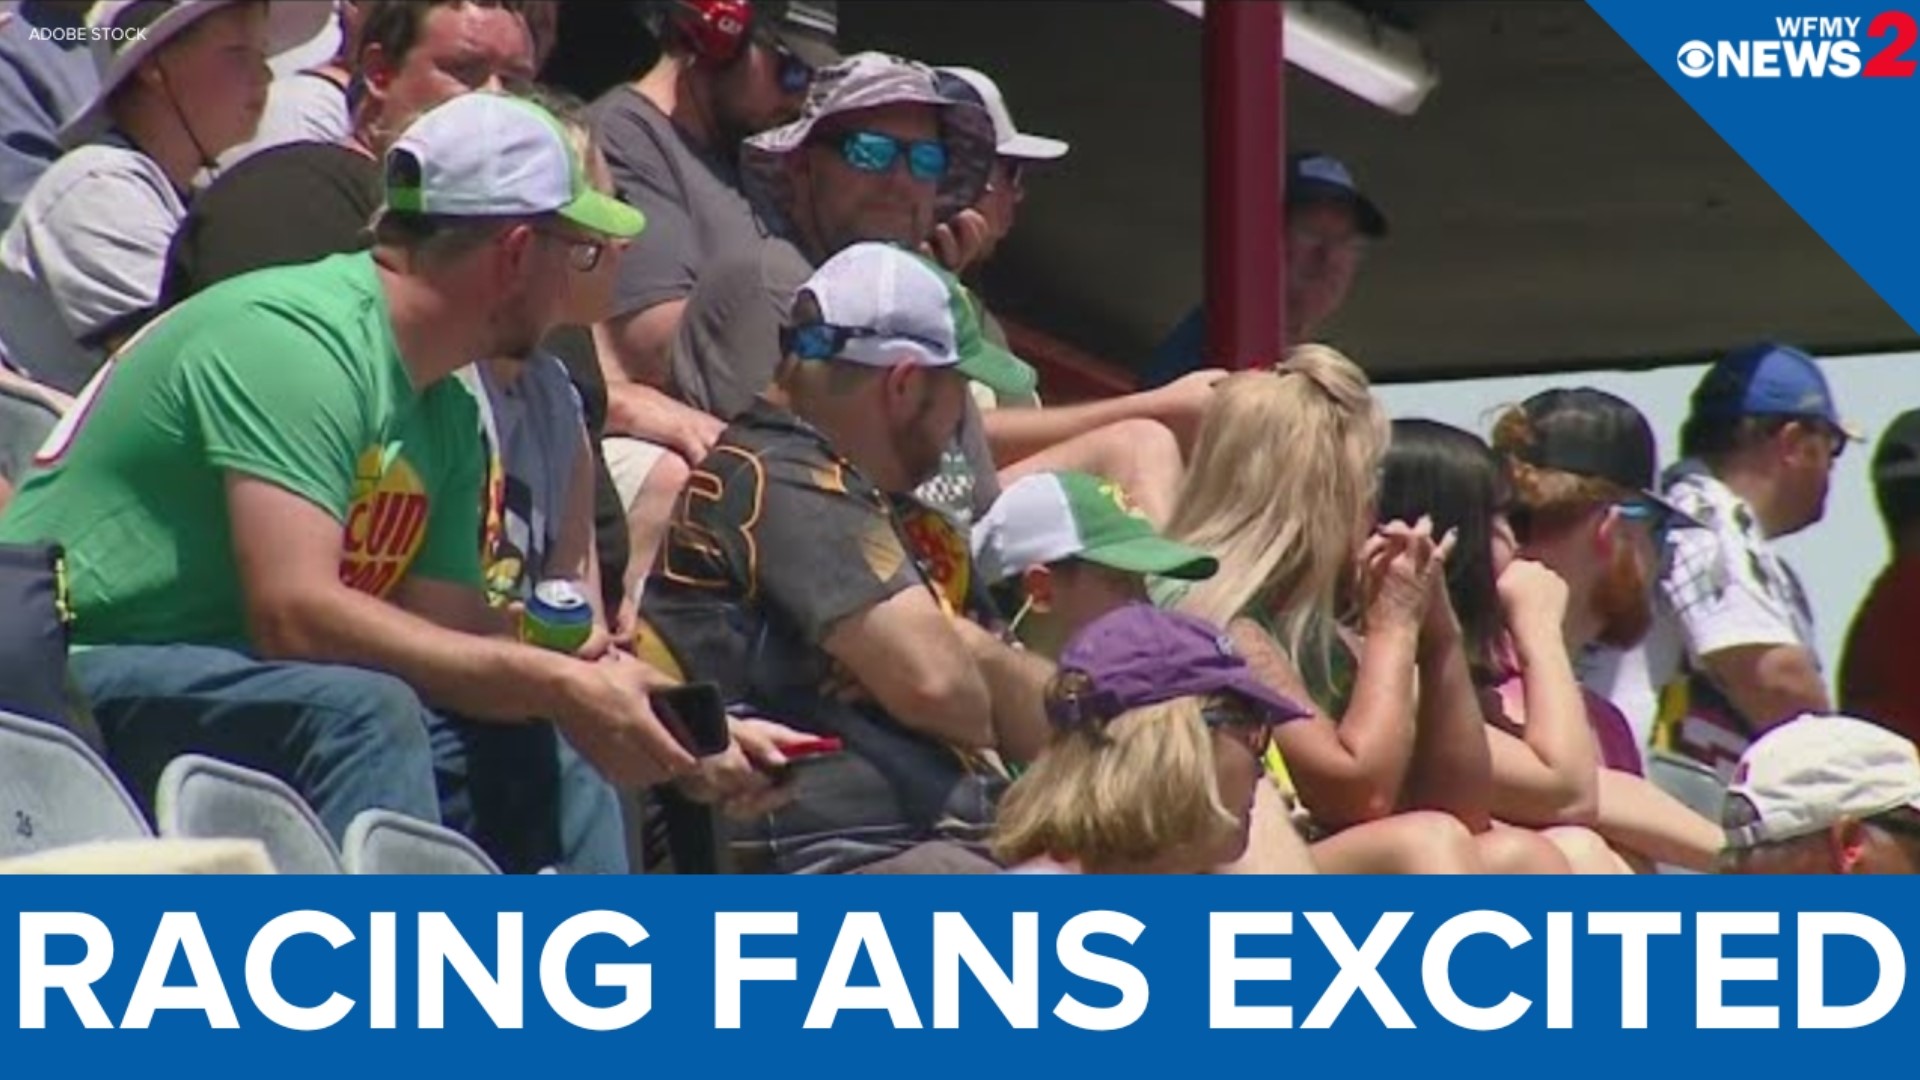 It’s the first day of racing at North Wilkesboro Speedway and fans are ready to see their favorites.